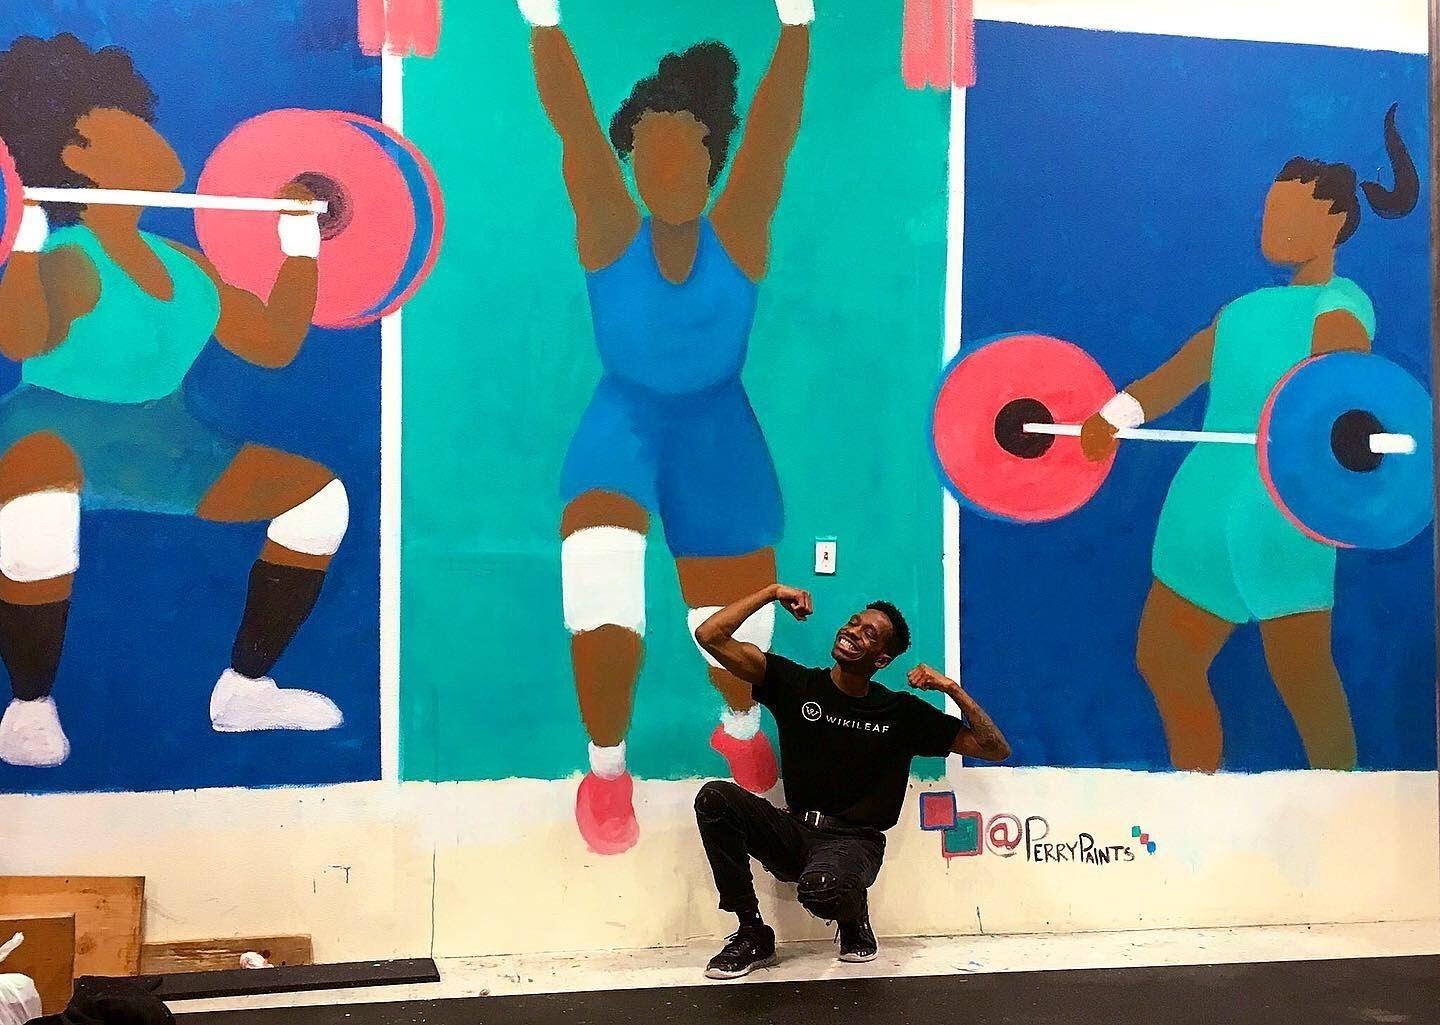 Perry Porter stands triumphantly in front of a mural painted in bright colors.